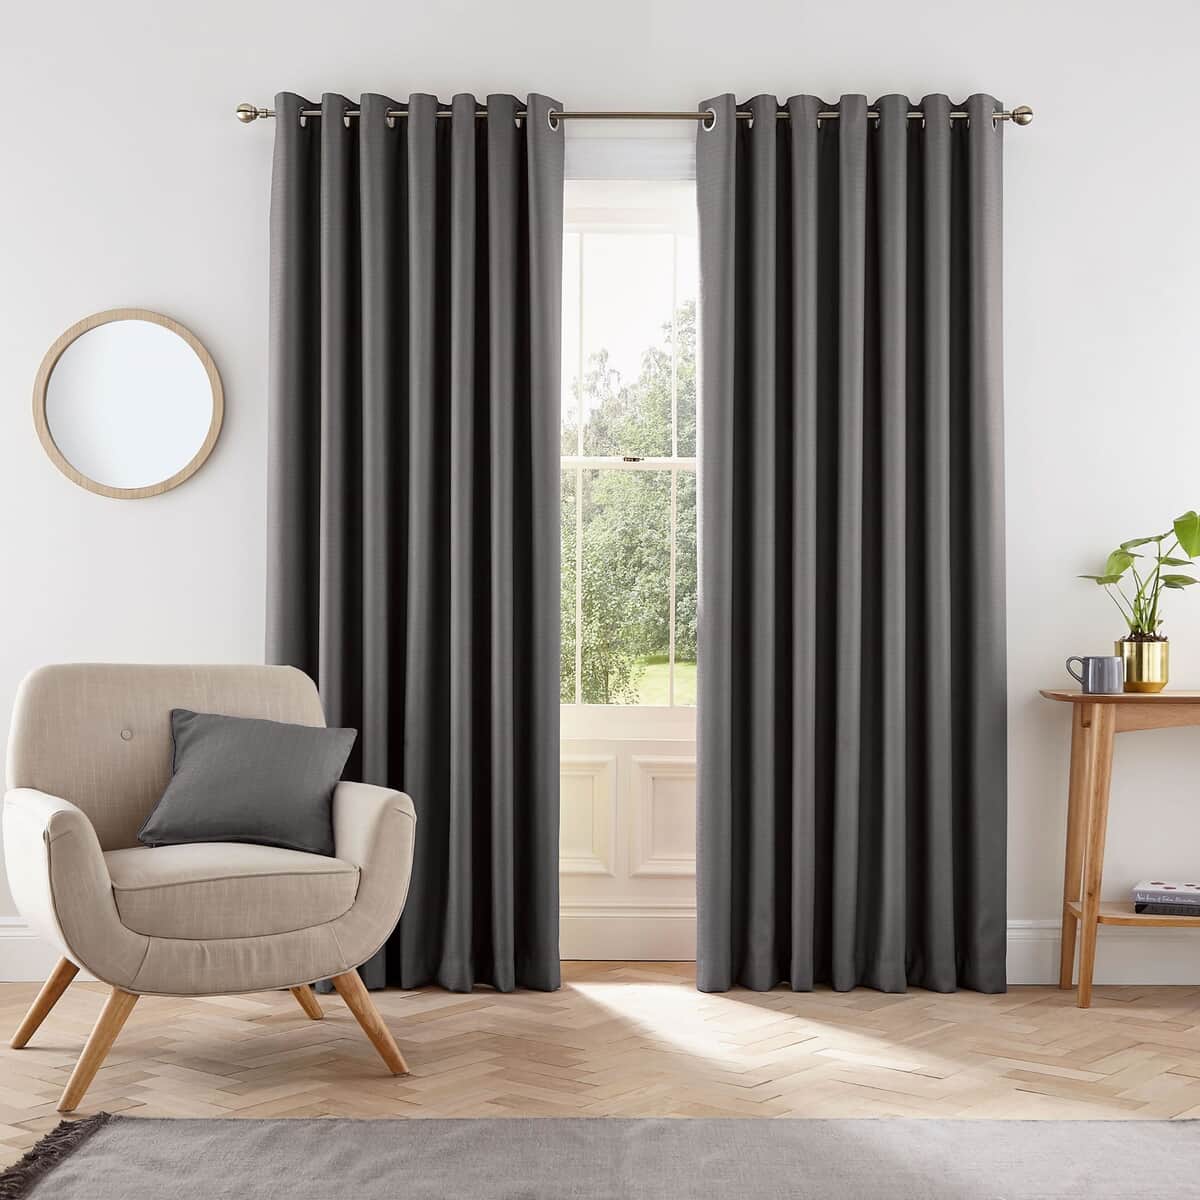 Helena Springfield Eden Charcoal Curtains large